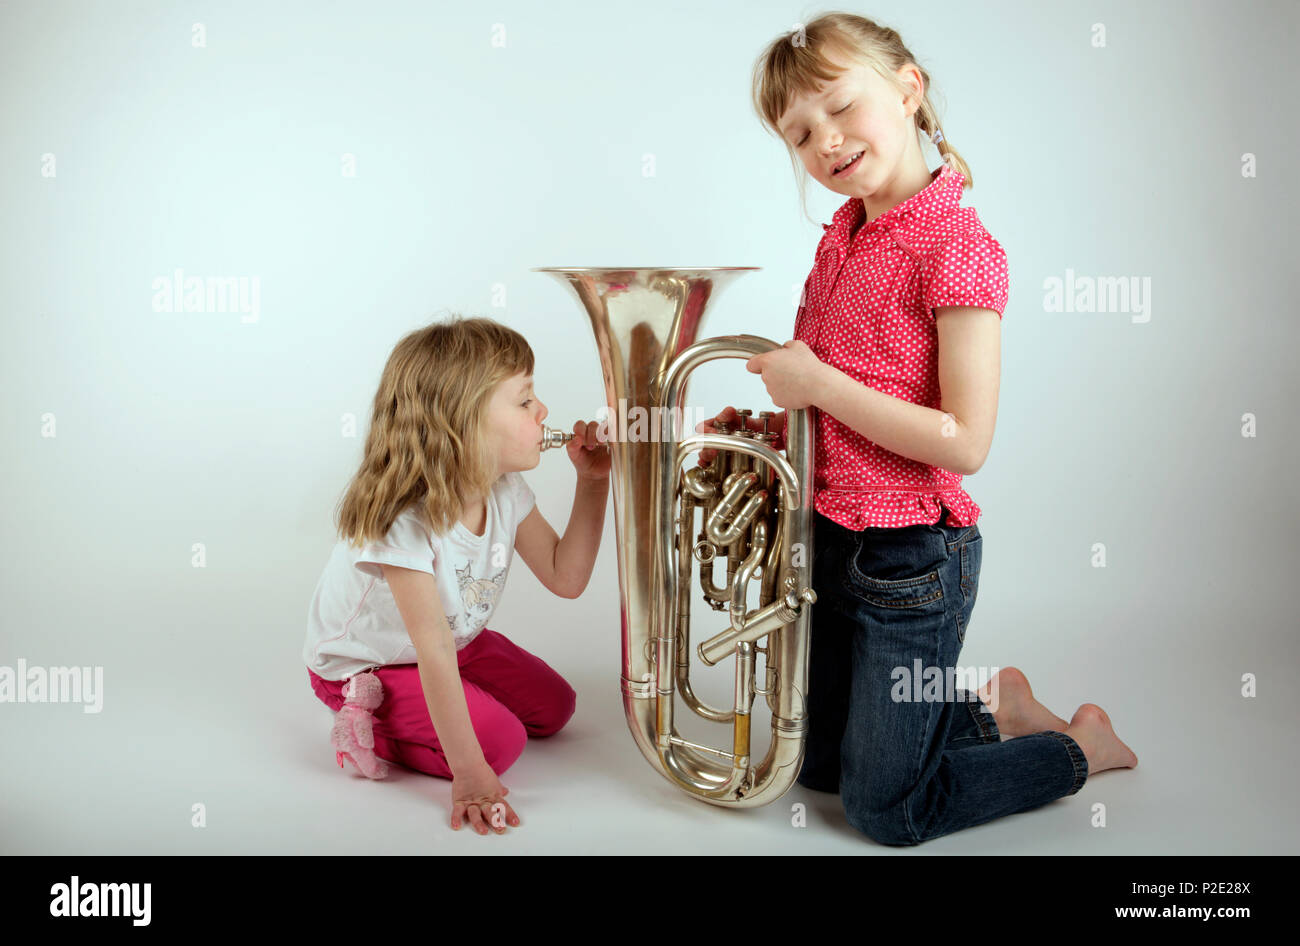 https://c8.alamy.com/comp/P2E28X/young-girl-playing-the-euphonium-whilst-the-other-listens-appreciatively-P2E28X.jpg